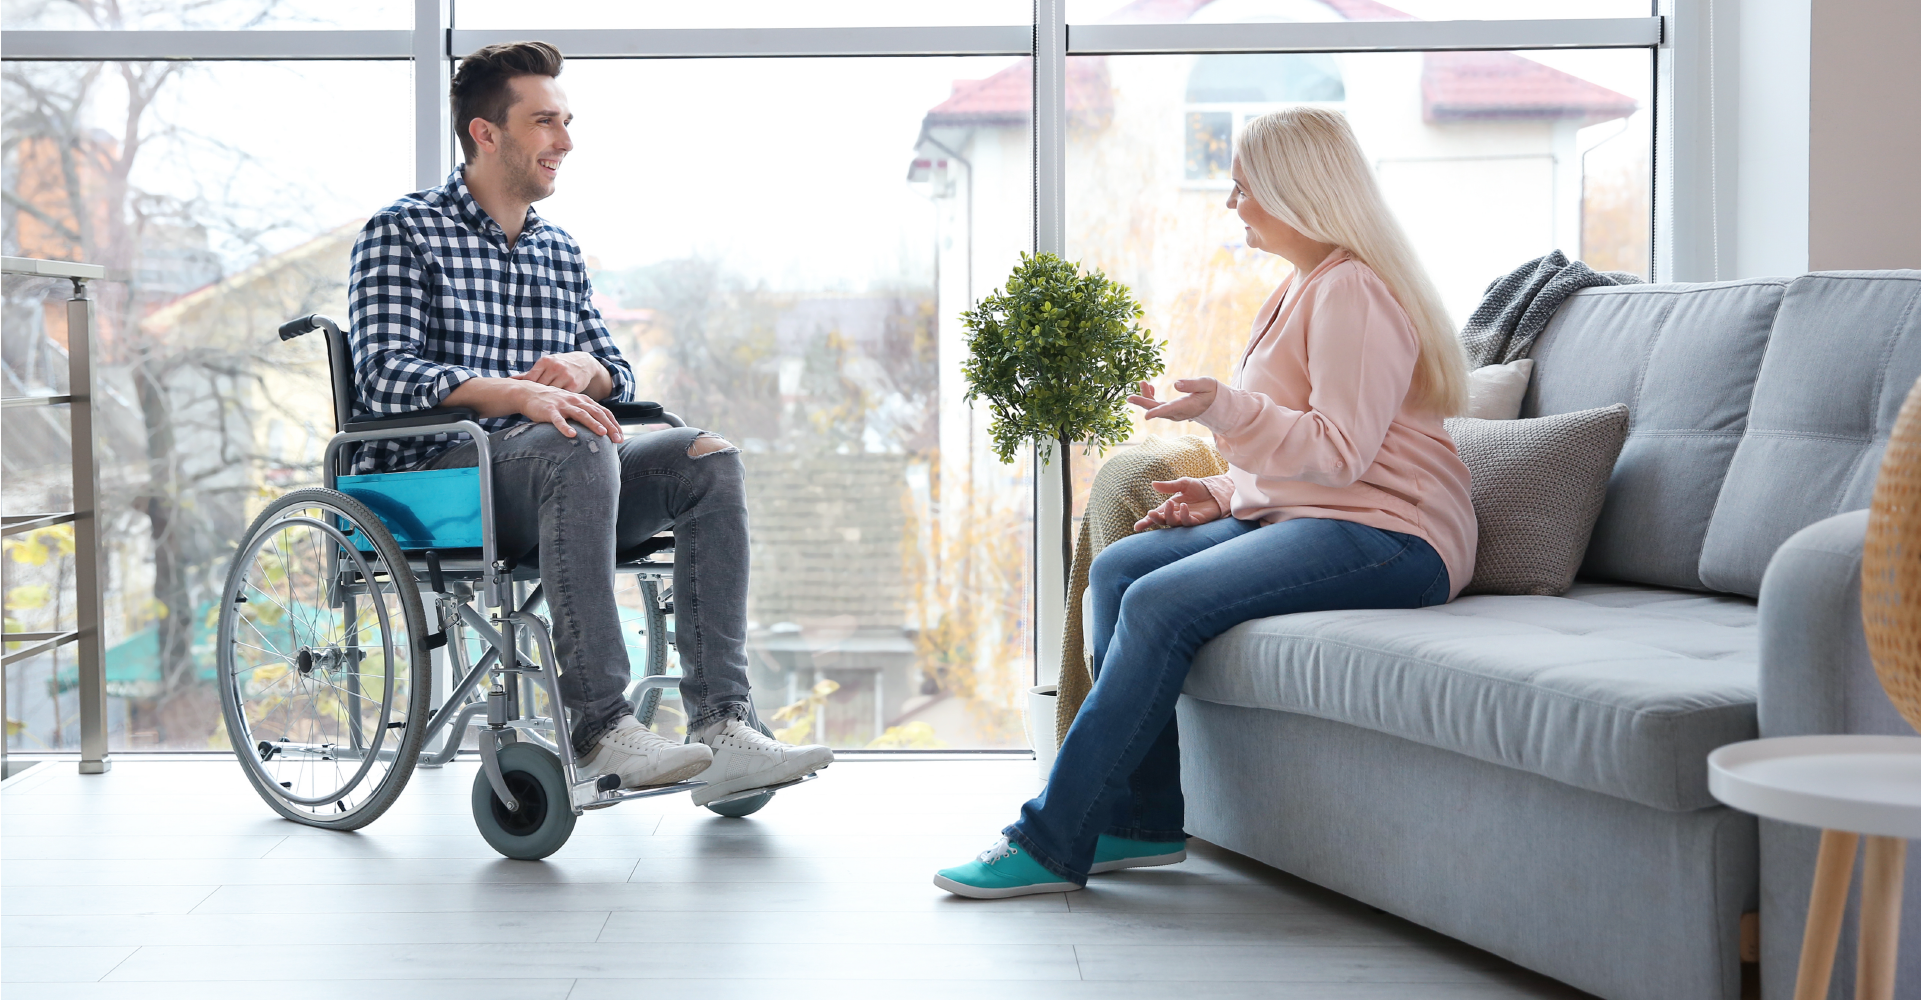 A smiling, happy man in a wheelchair talking to a woman sitting opposite him on a grey couch.